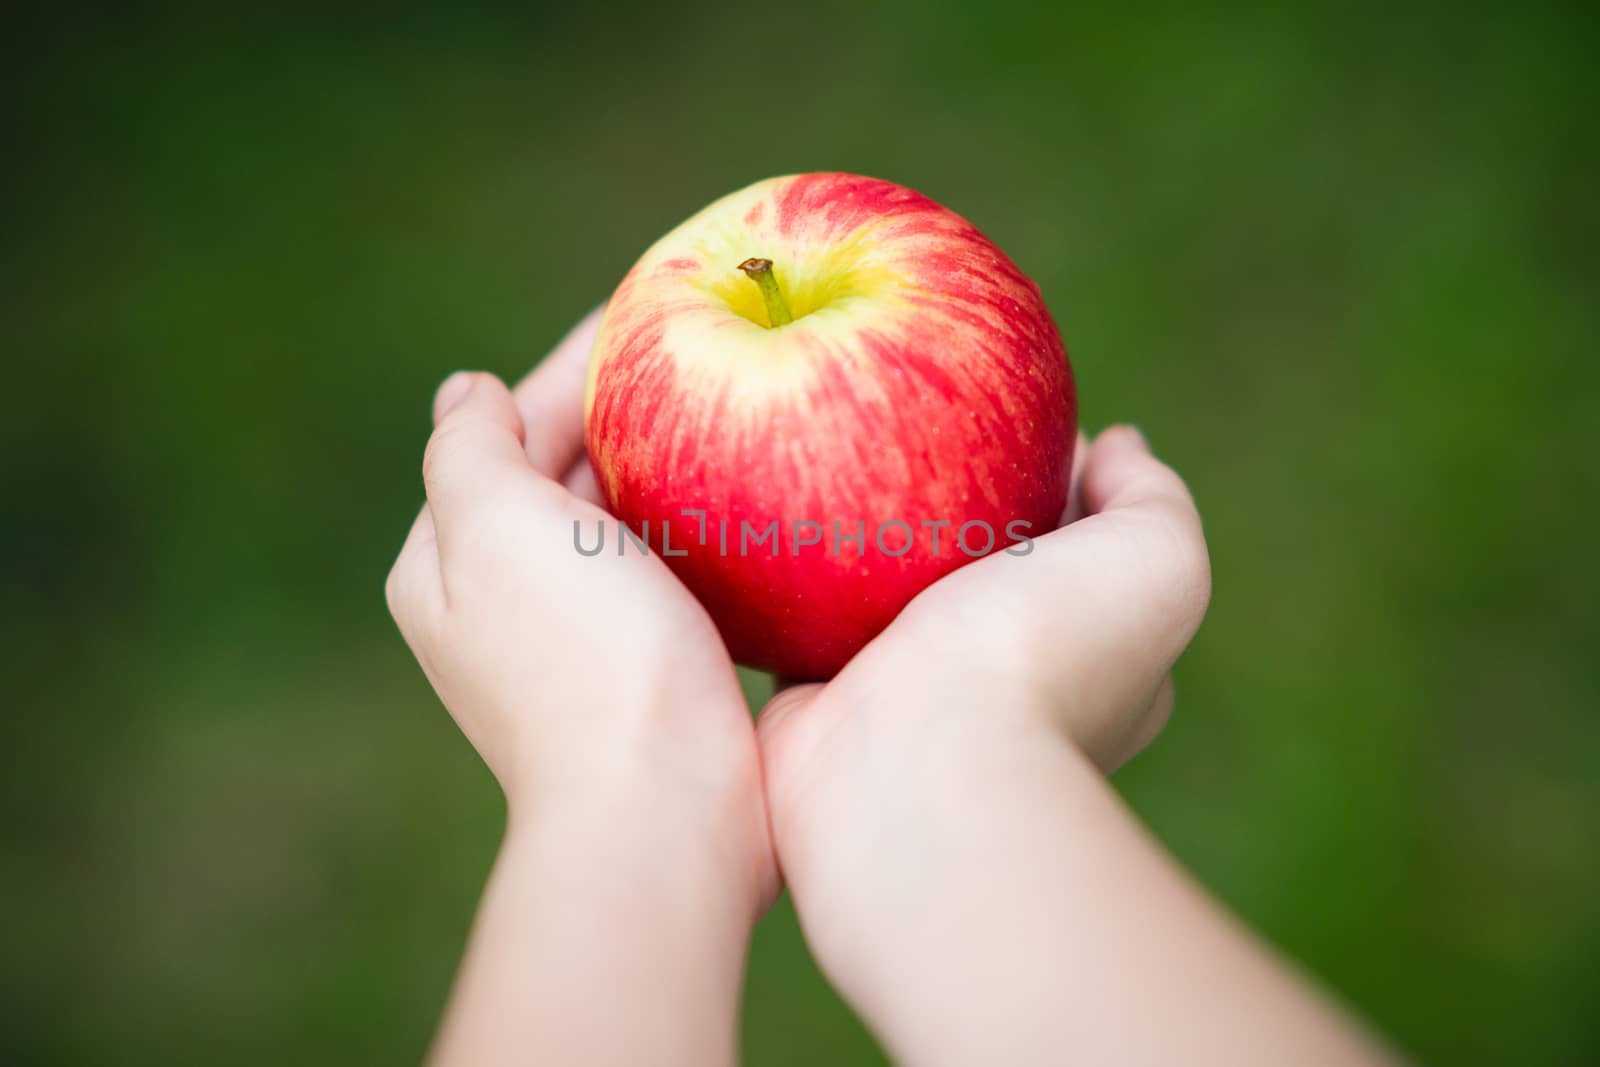 Concept of Healthy Lifestyle Illustrated by Hands Holding Apple by supparsorn